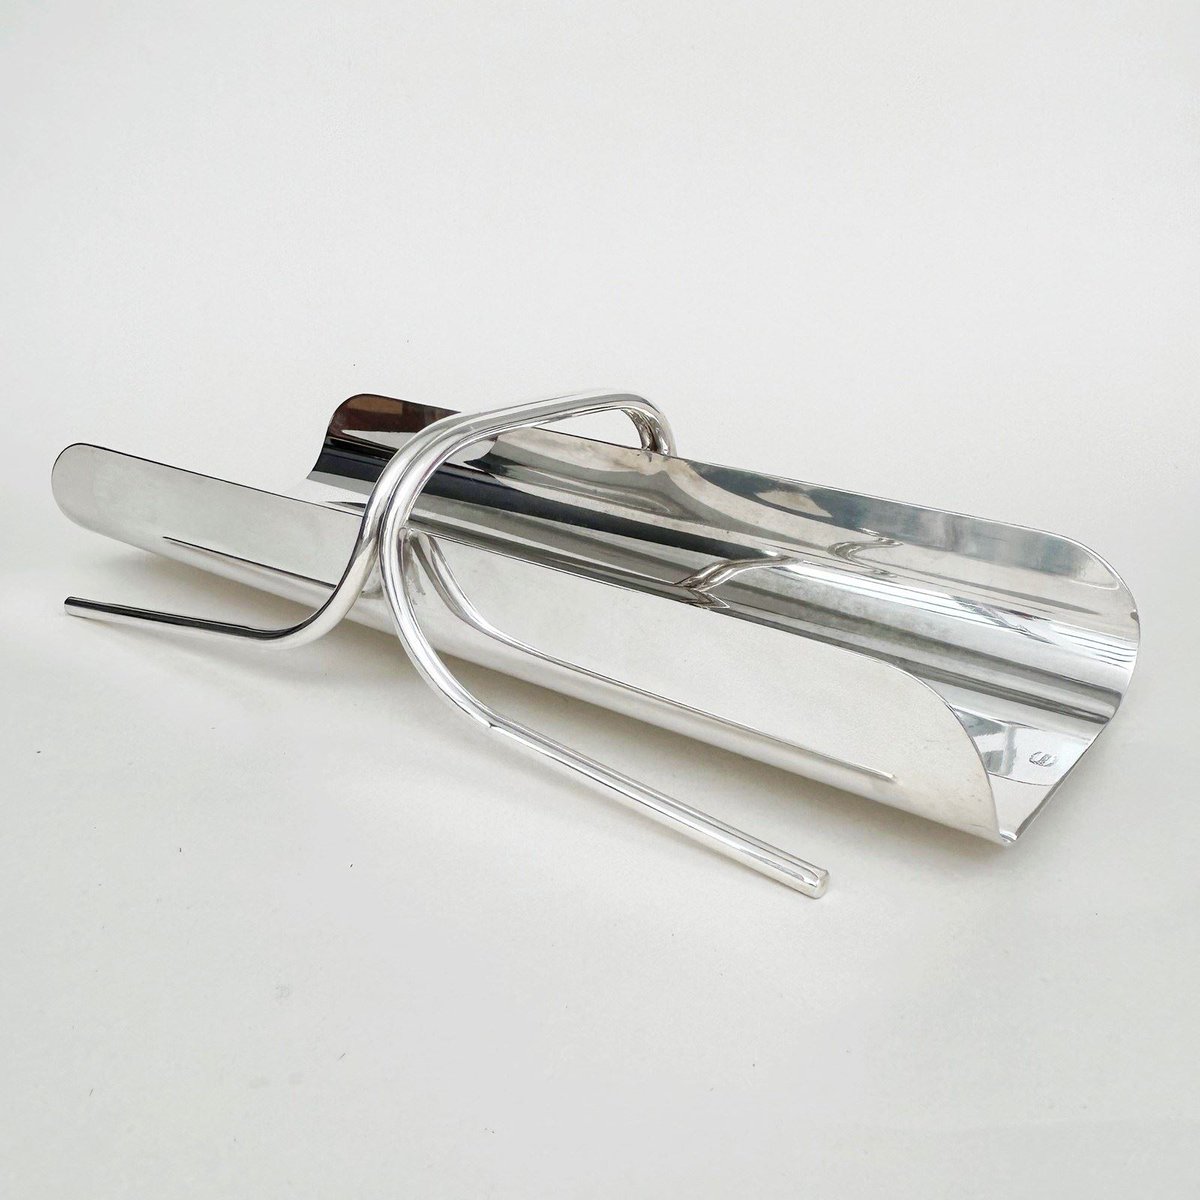 The perfect wedding or birthday gift. A striking large silver plated 1960s porta grissini after Lino Sabattini. Bread never tasted so good. See it here bit.ly/4a3hNgN